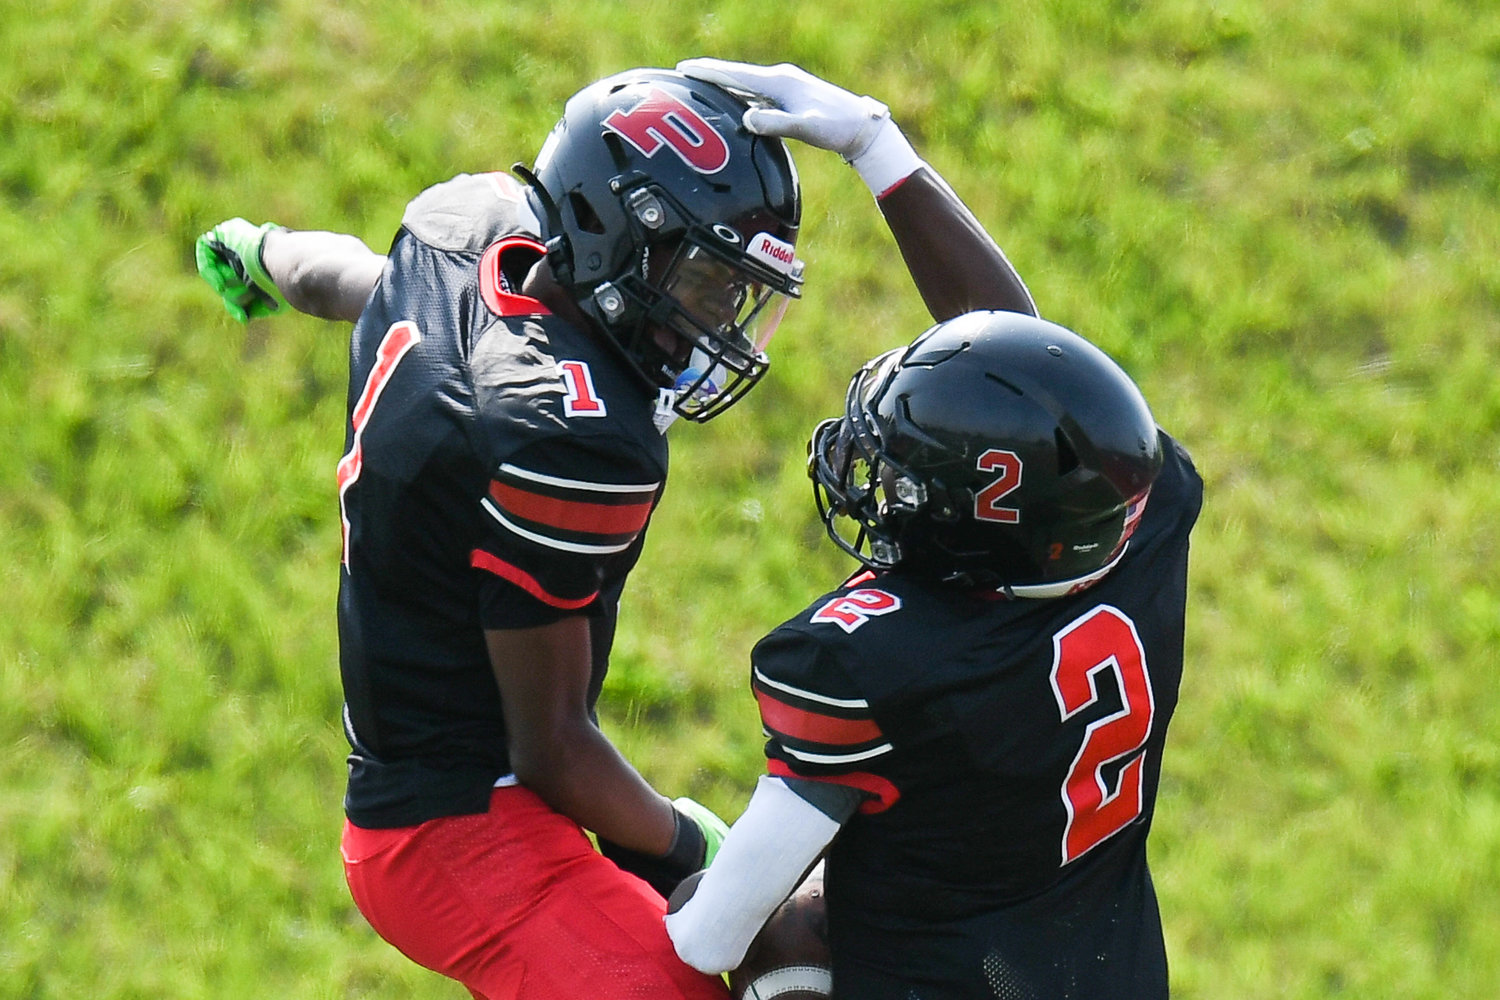 Jerquell Henderson (1) and Domante Cook (2) have been key contributors to the Thomas R. Proctor run game this season. Proctor is set to take on Henninger at 6 p.m. Friday.